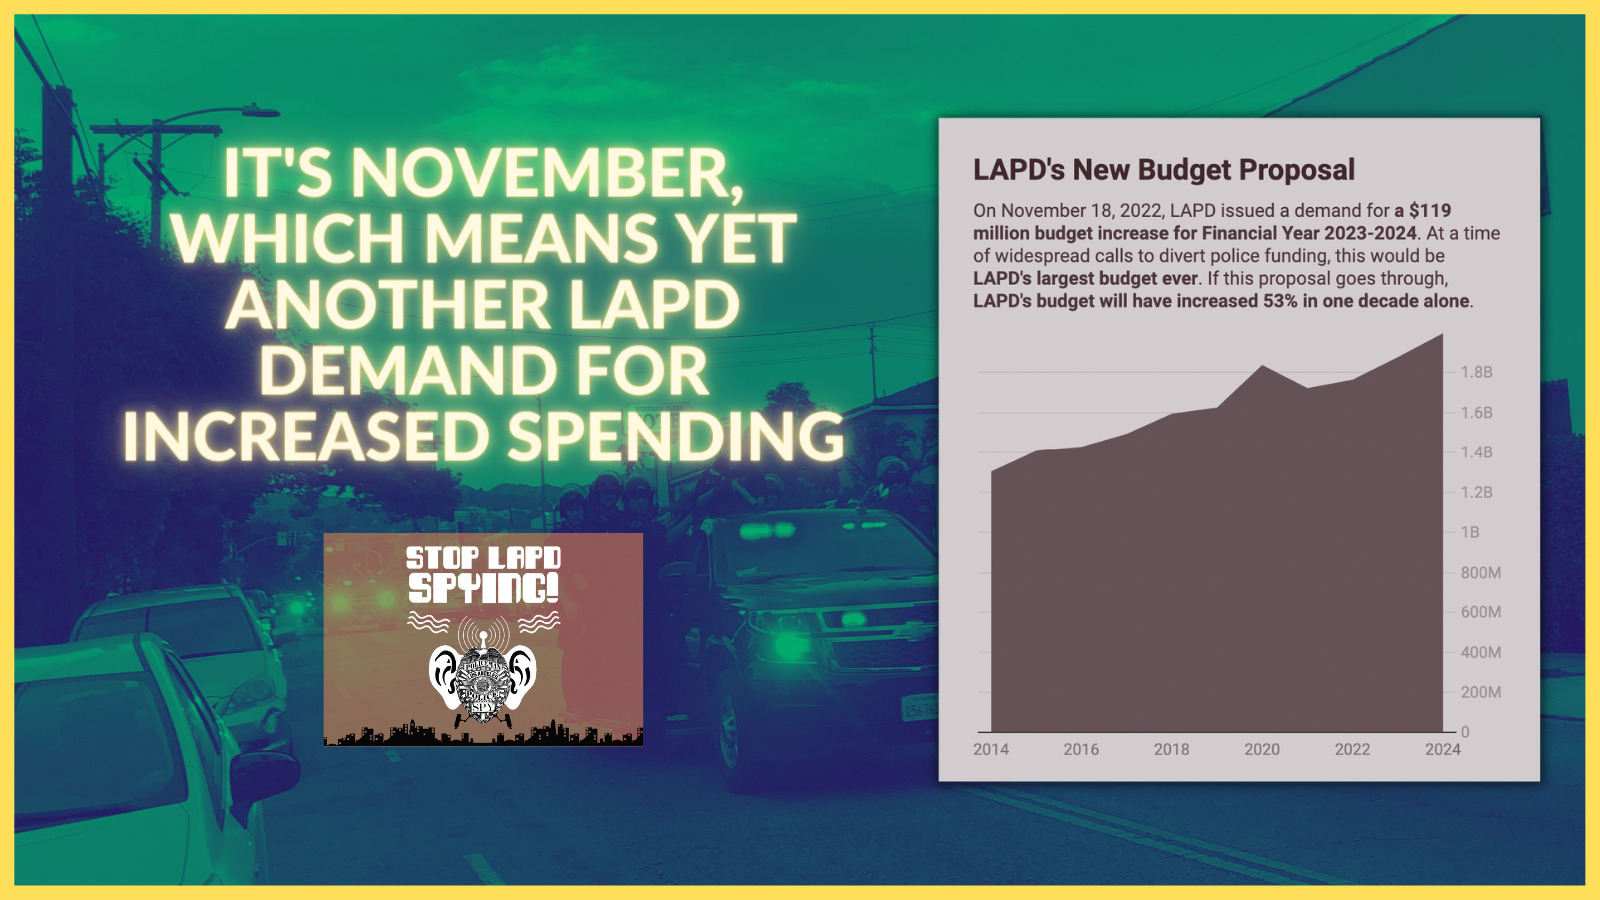 Yet Another LAPD Demand for a Budget Increase